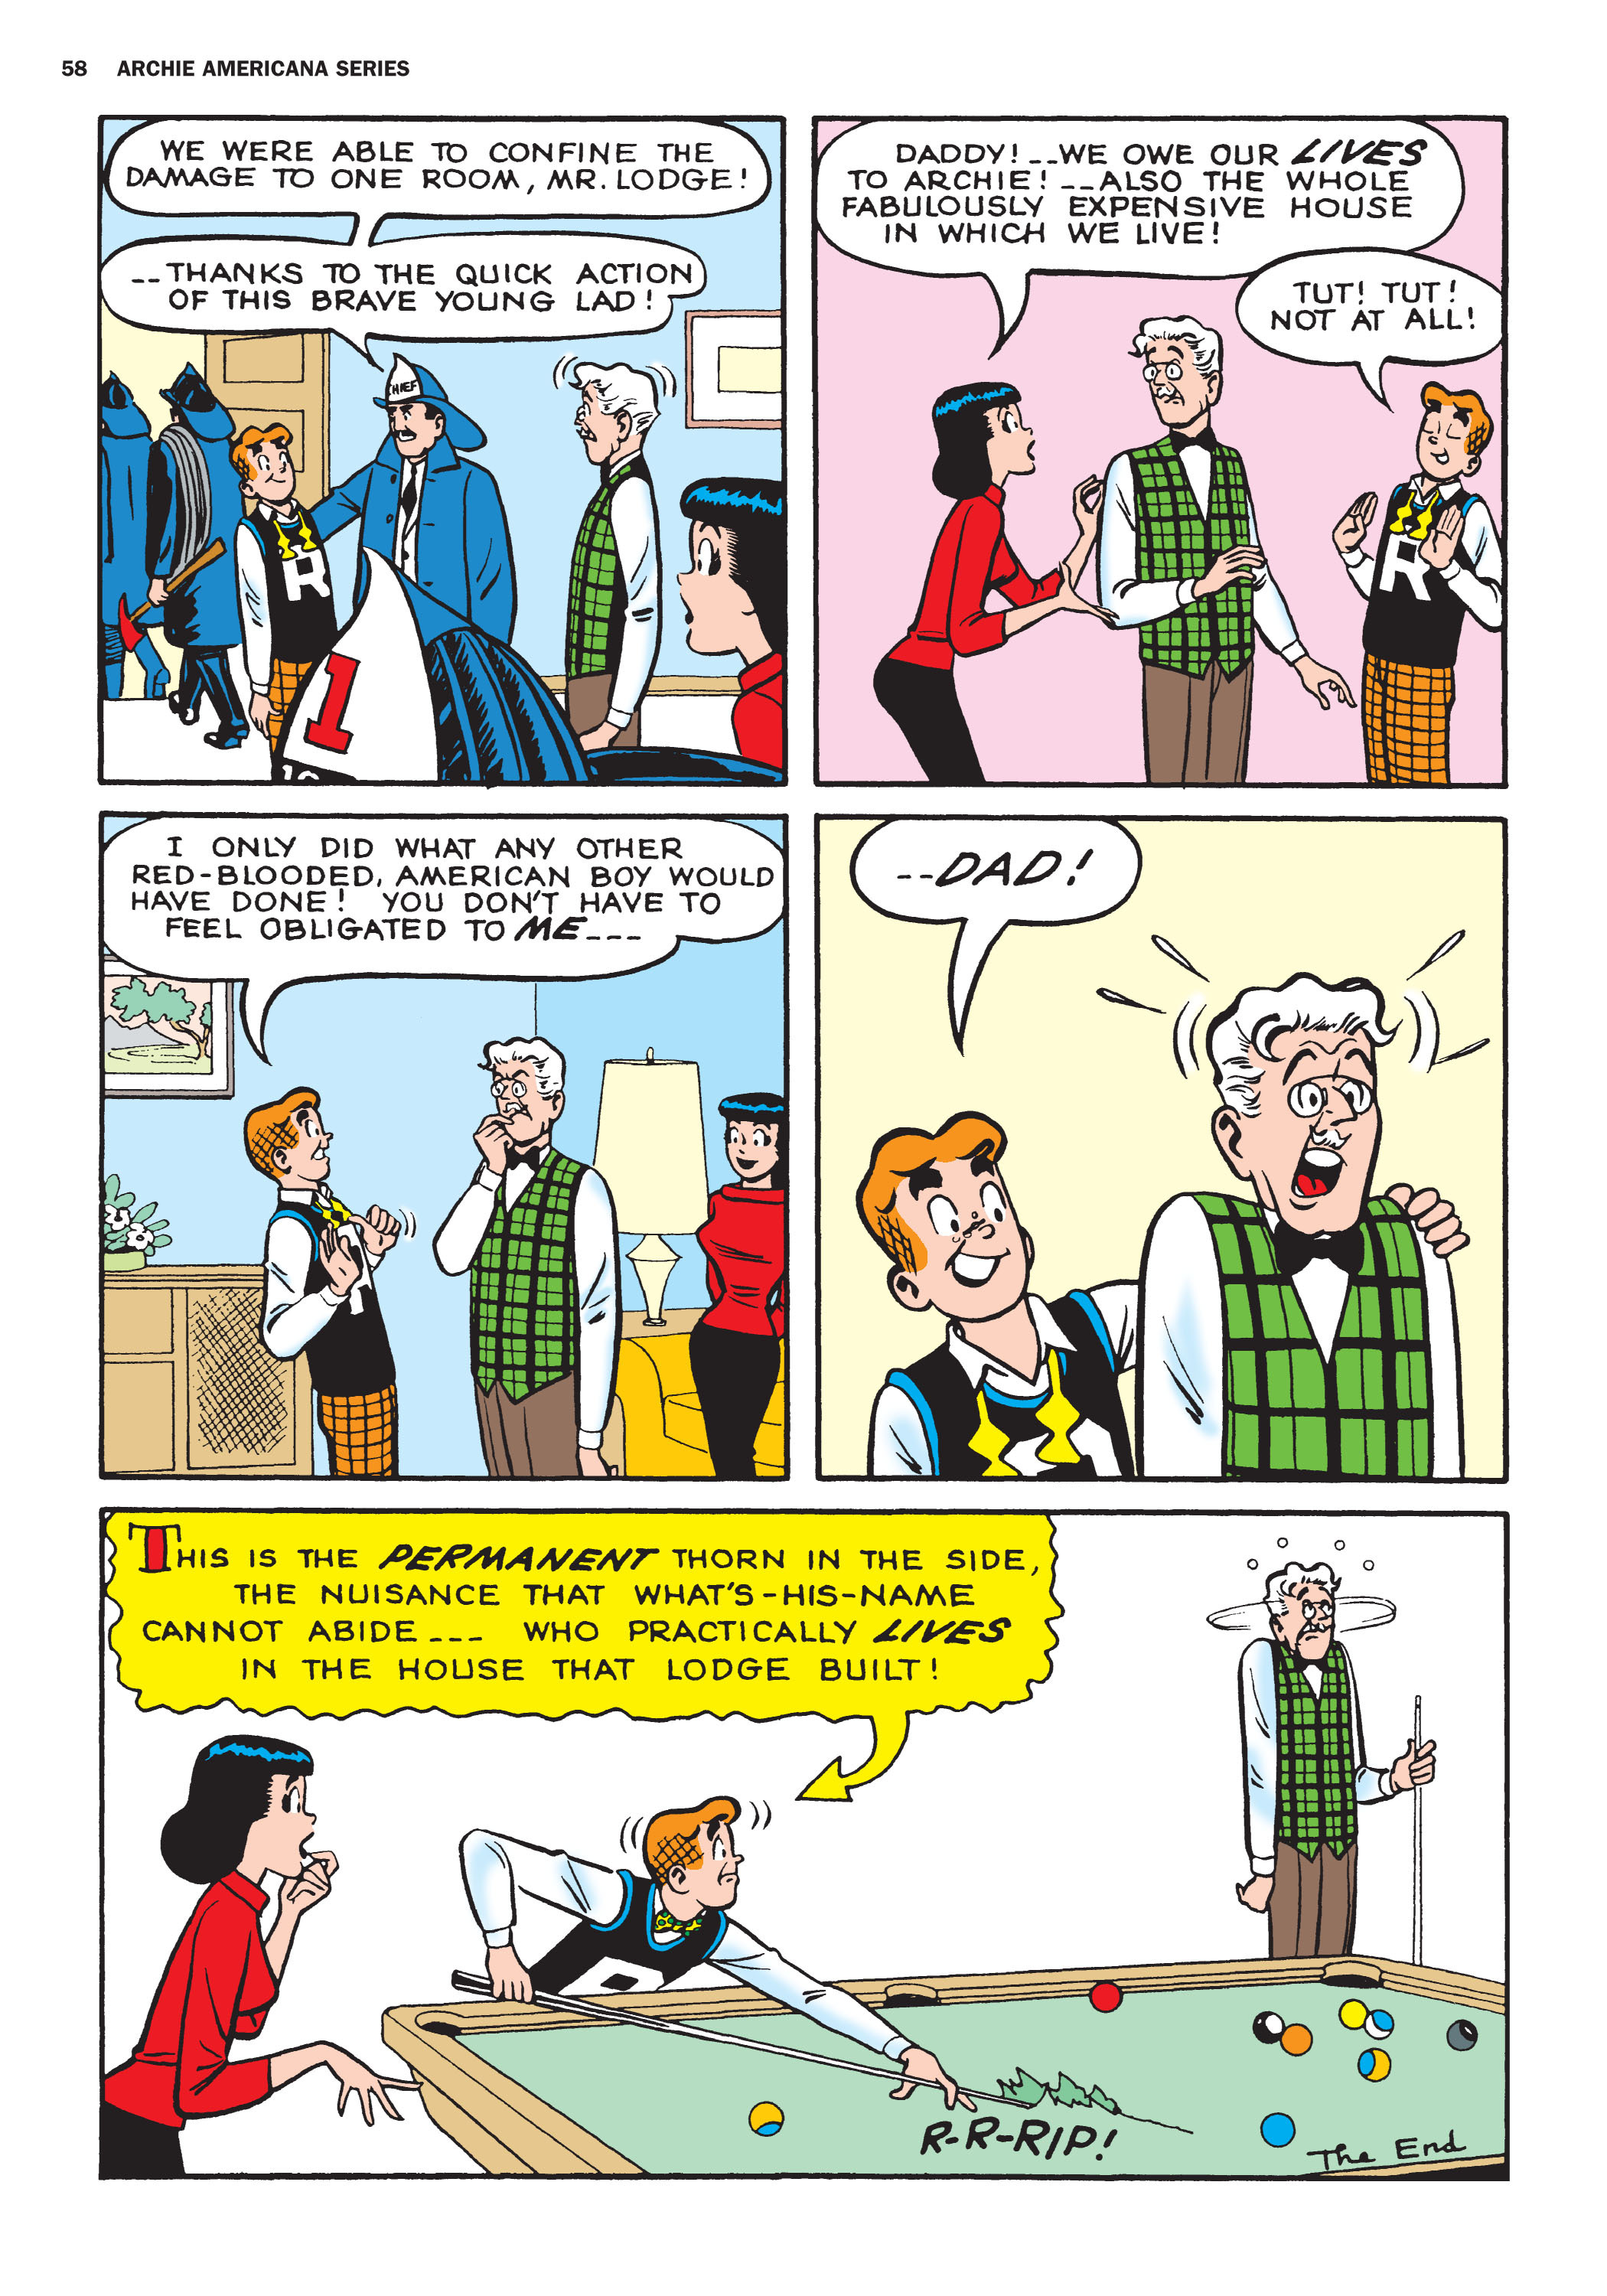 Read online Archie Americana Series comic -  Issue # TPB 8 - 59